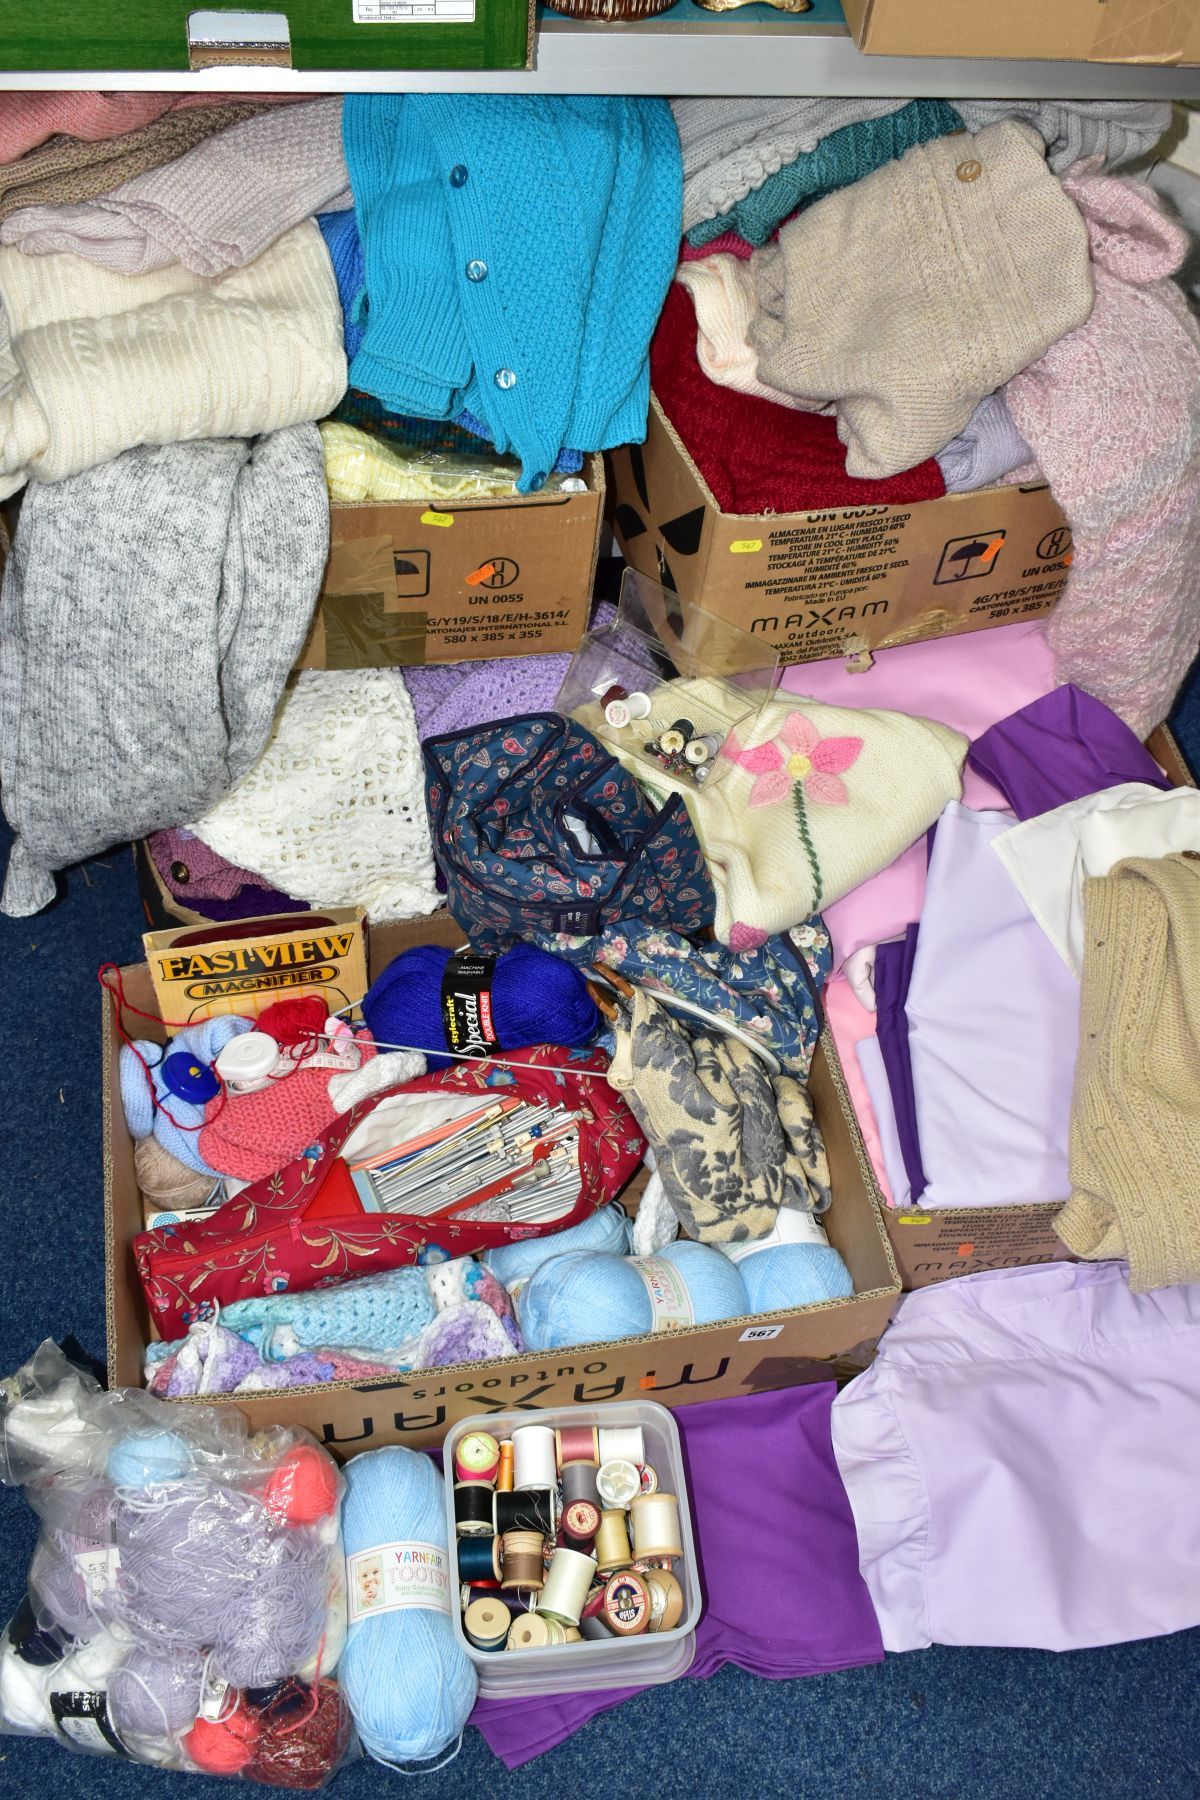 FIVE BOXES OF WOOL, KNITTING NEEDLES, BEDDING AND KNITWARE, the knitware looks to be homemade, the